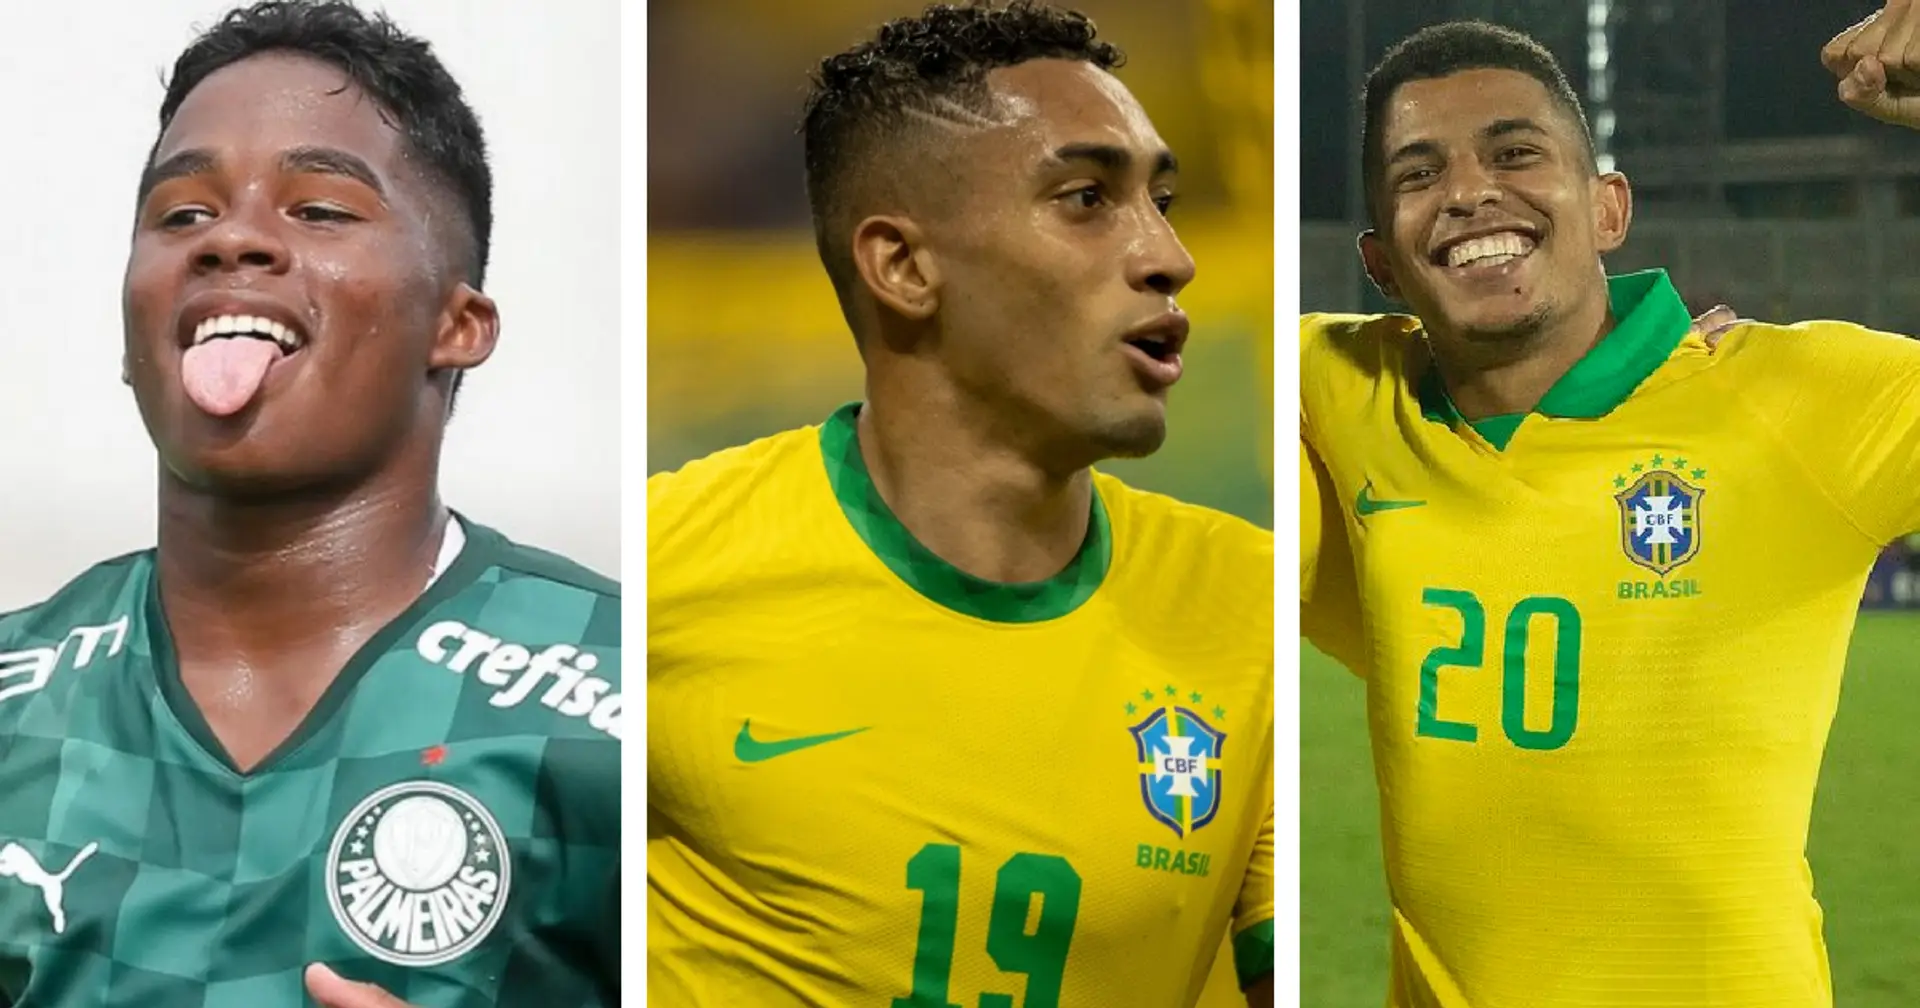 Barcelona could sign 7 new Brazilians in less than two years - we list them